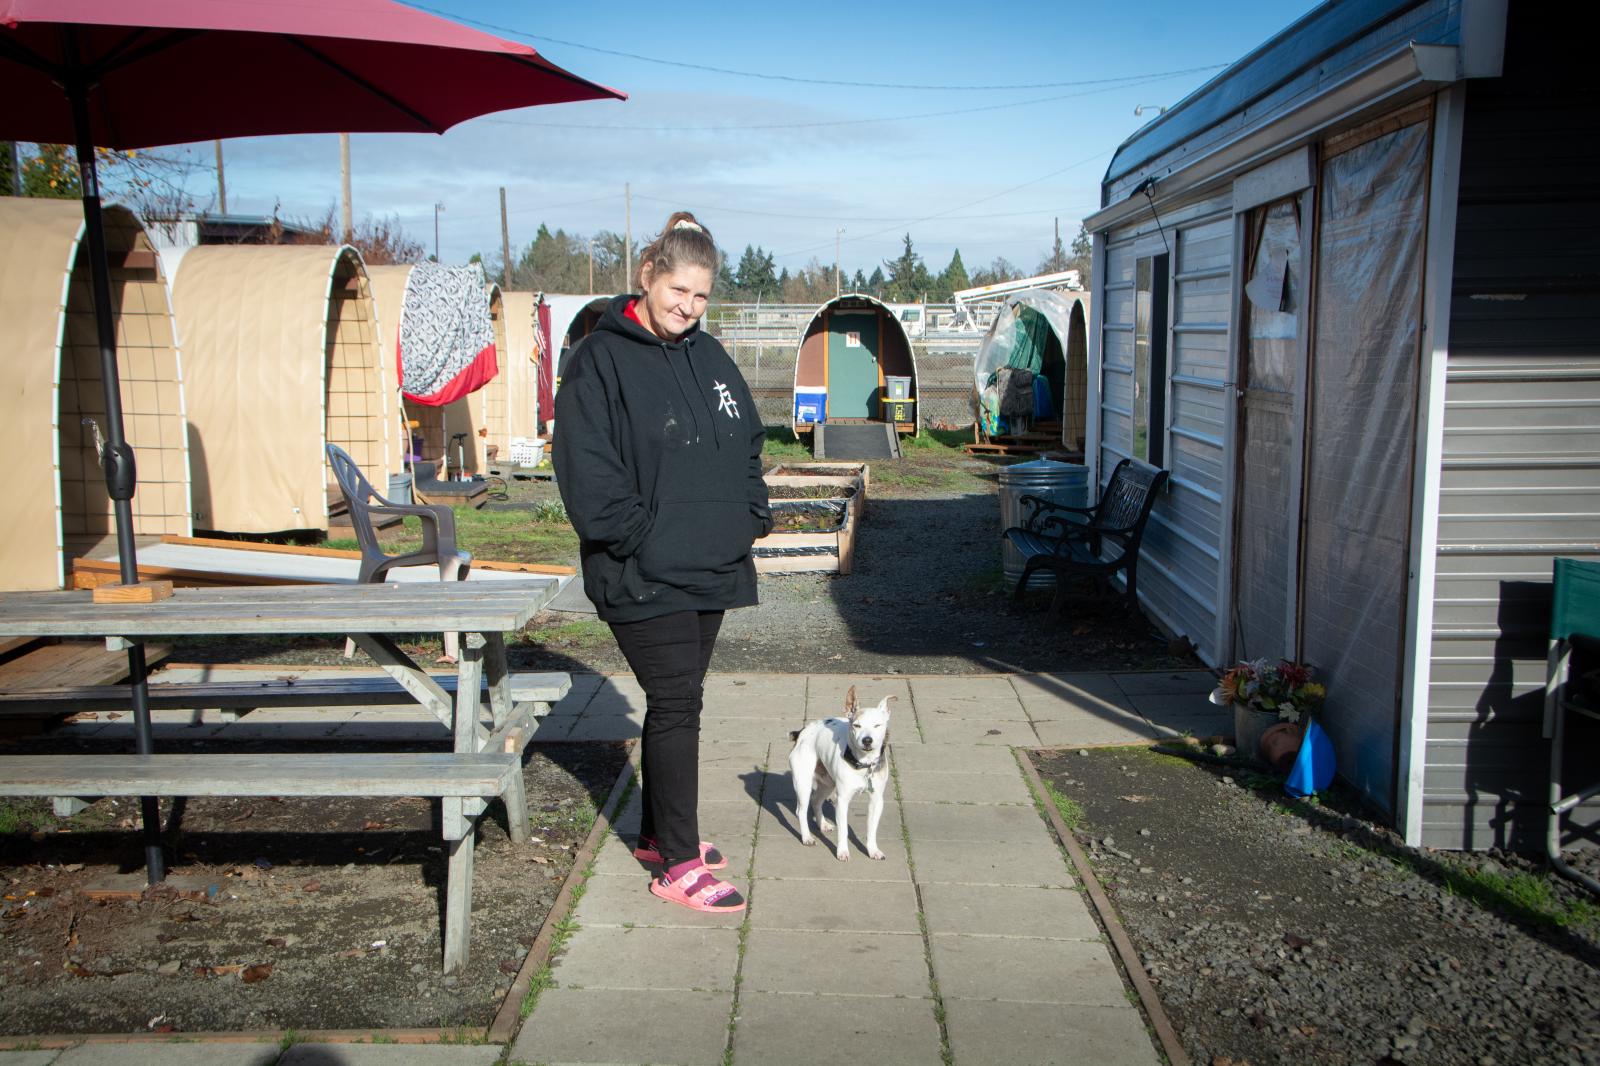 Stacie, Resident at a Community Supported Shelters Safe Spot Community, November 2020